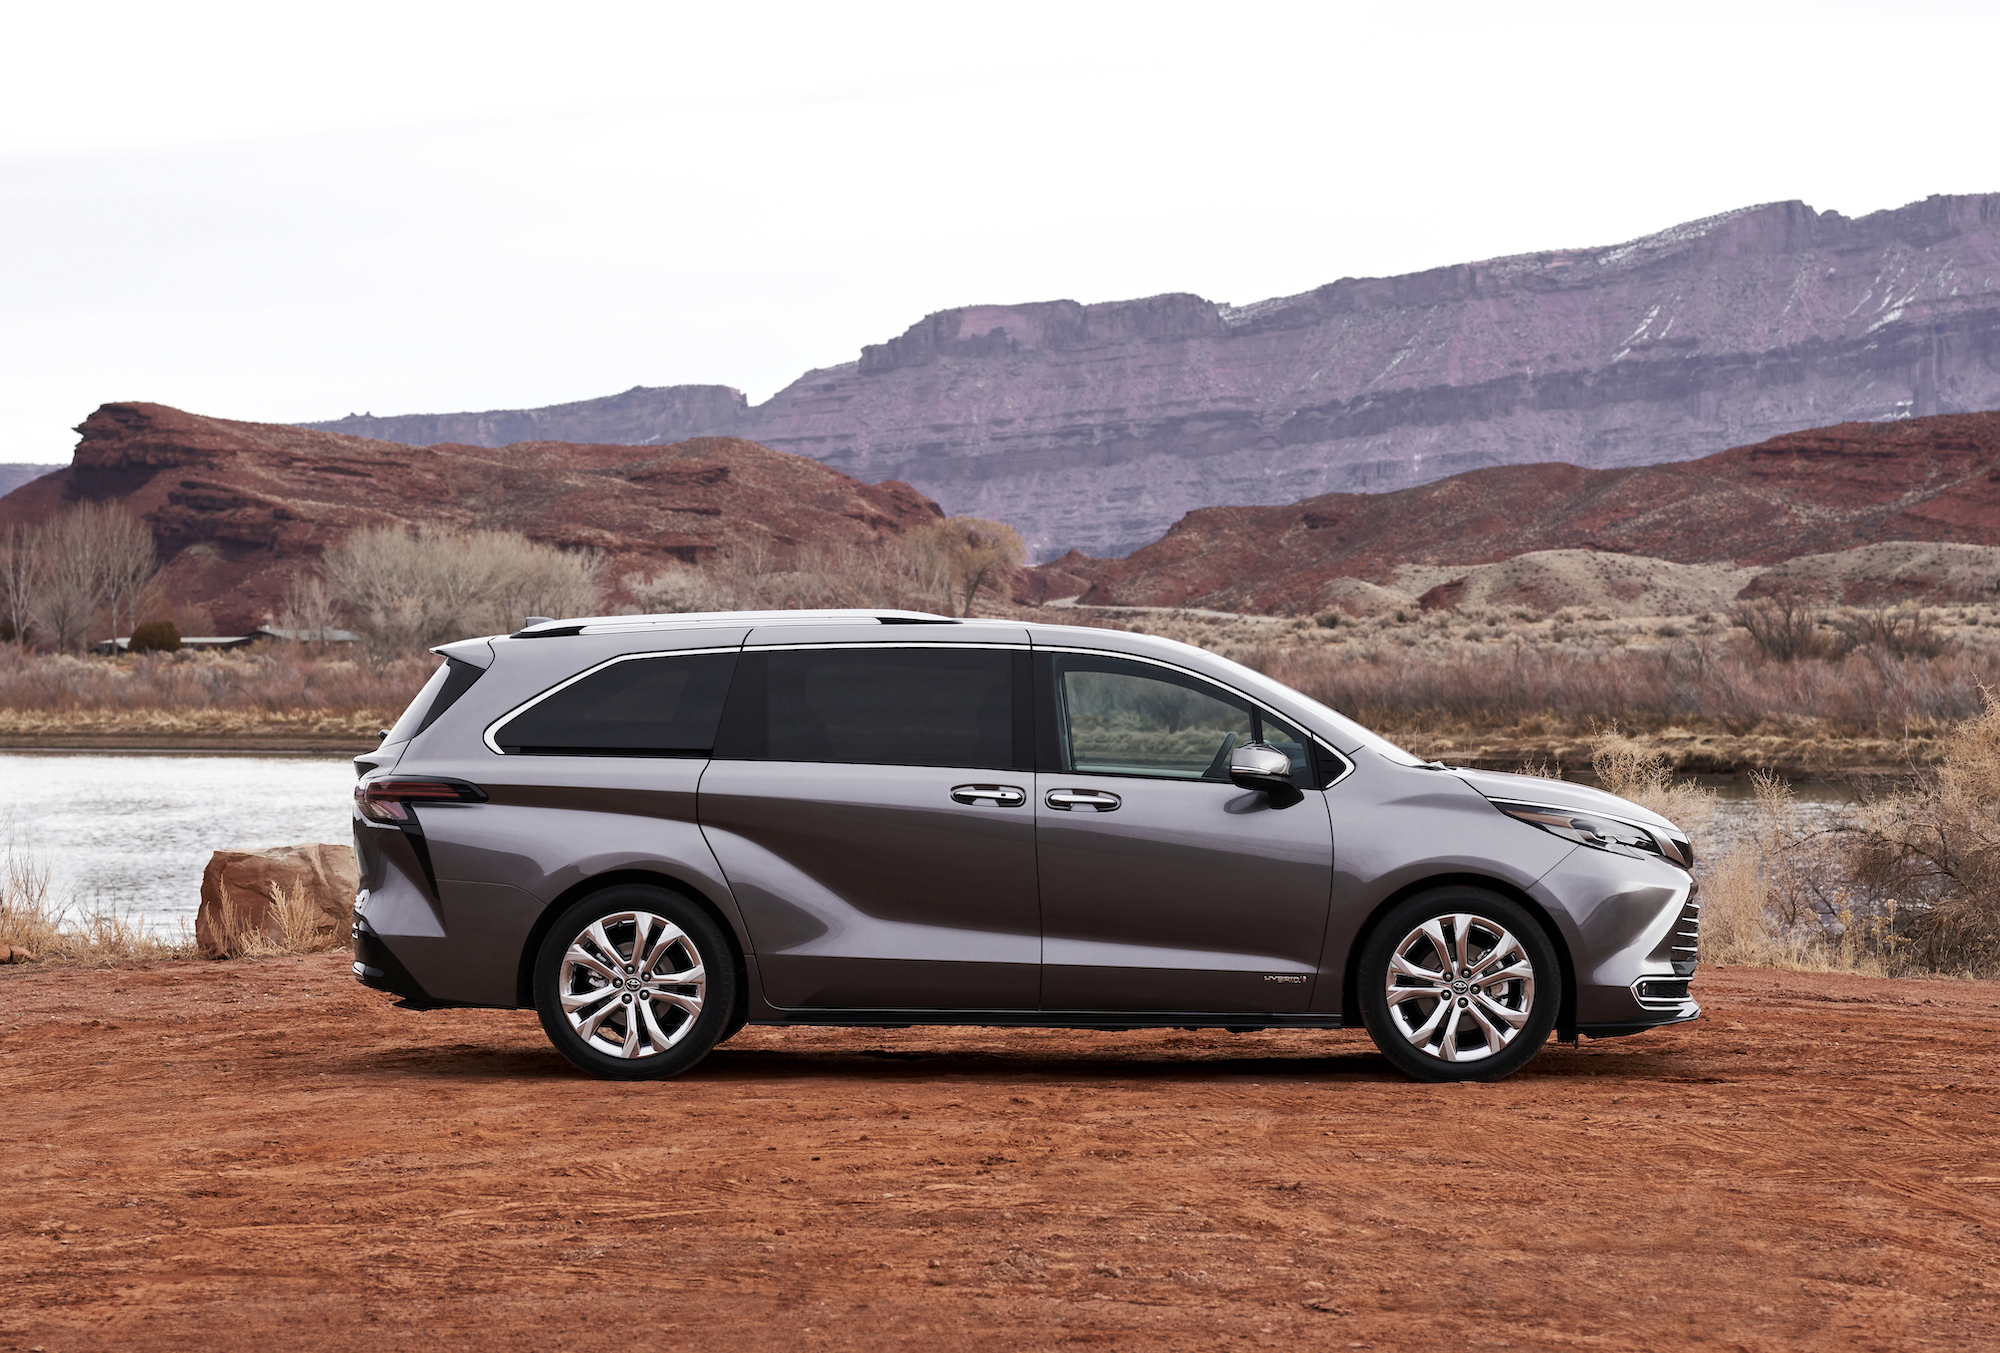 A pewter-colored 2021 Toyota Sienna Platinum hybrid minivan parked in red dirt and a small lake in front of mountains